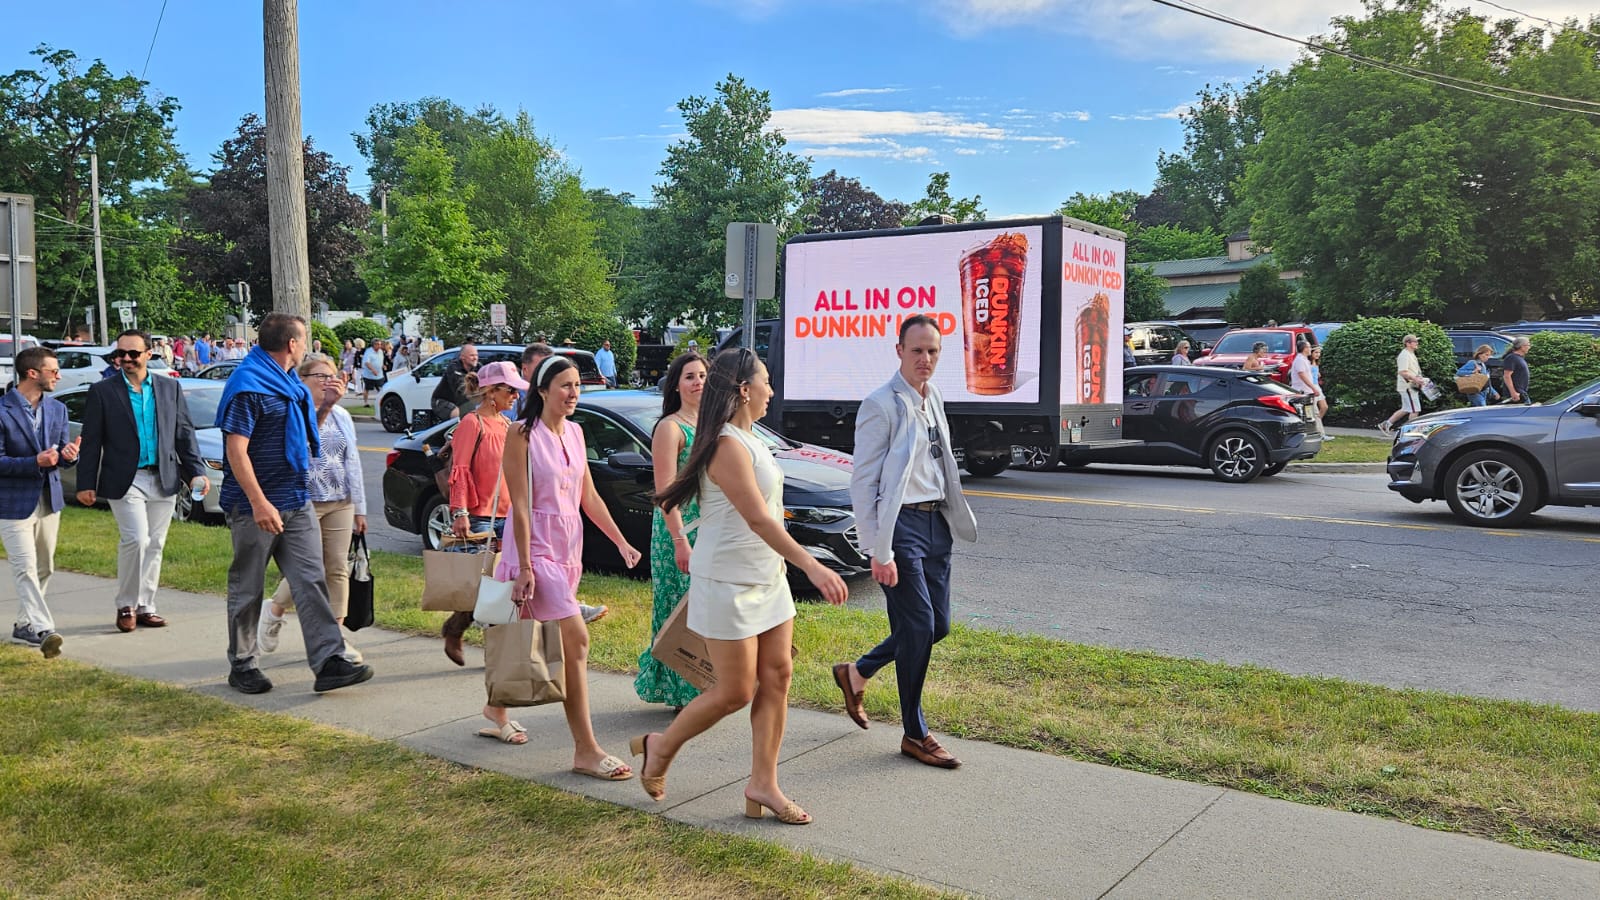 People walking on a sidewalk next to a street in a city with a Dunkin Donut advertisement on a mobile digital billboard truck.